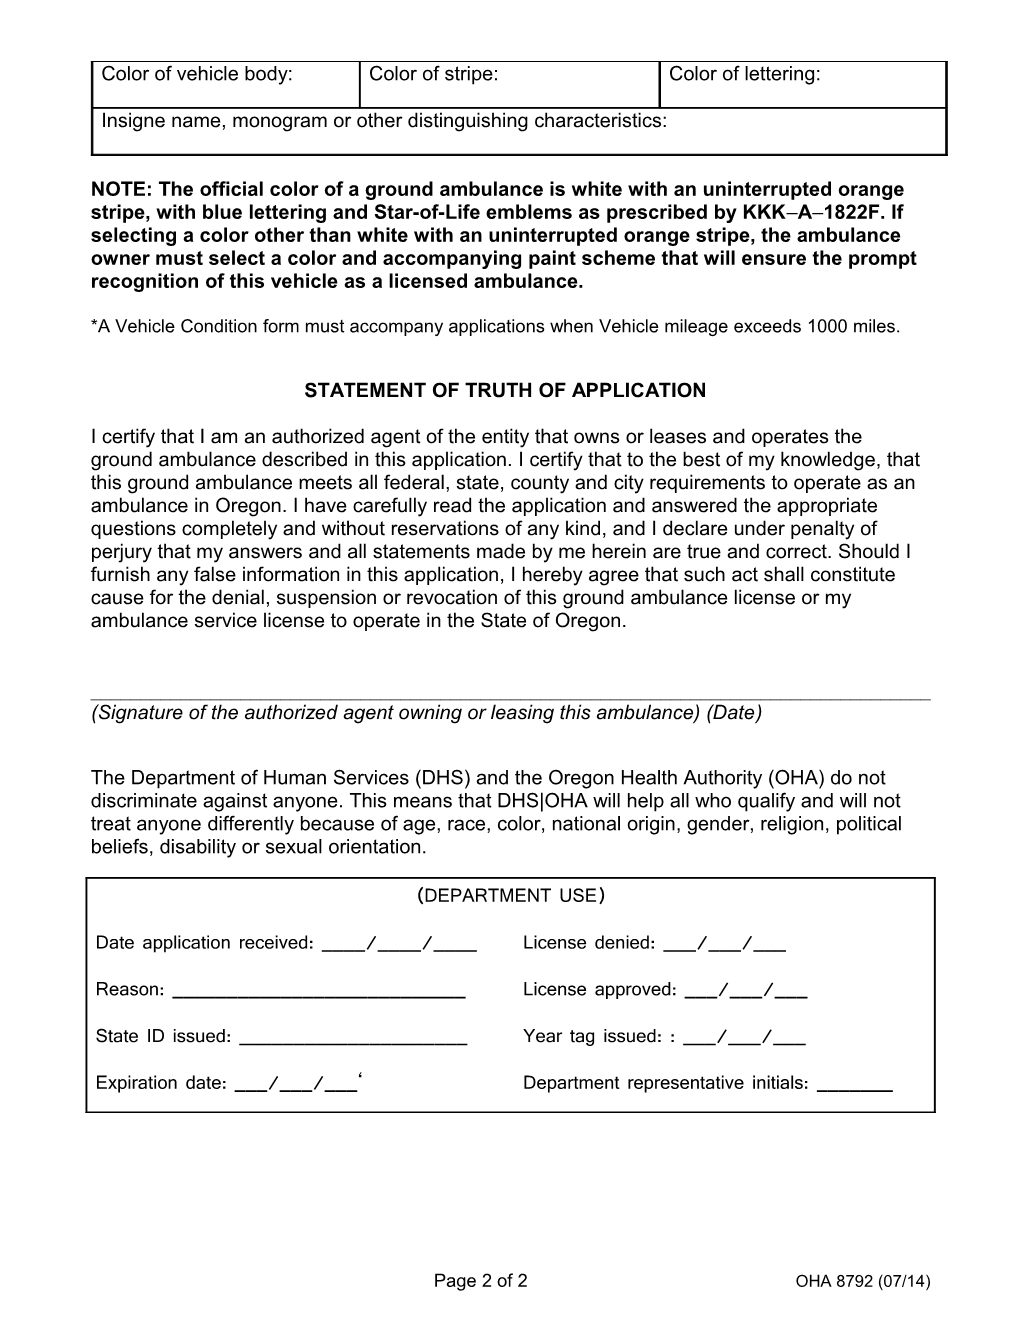 Application for a Ground Ambulance License OHA 8792 12/11